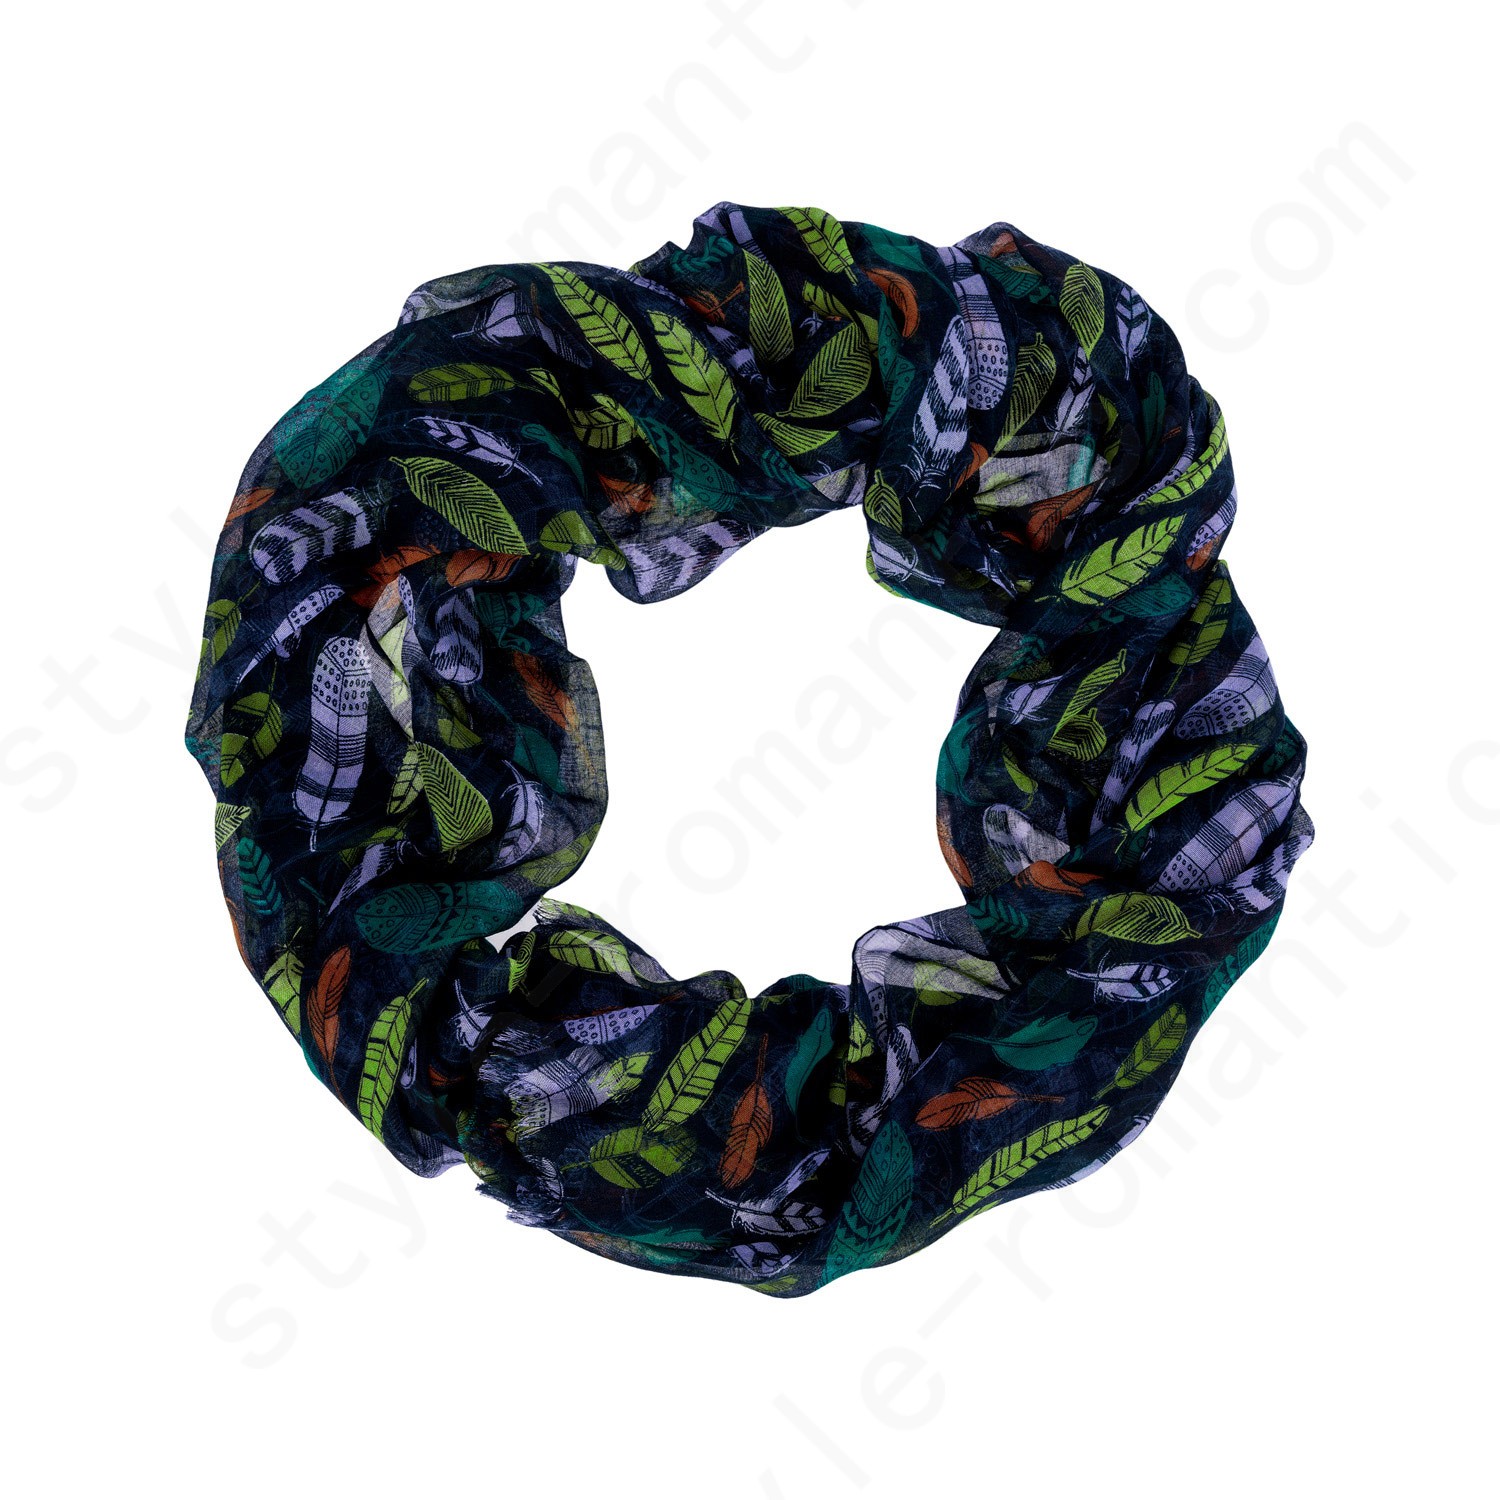 Thirty-One Gifts Avenue Scarf - Falling Feathers - Thirty-One Gifts Avenue Scarf - Falling Feathers